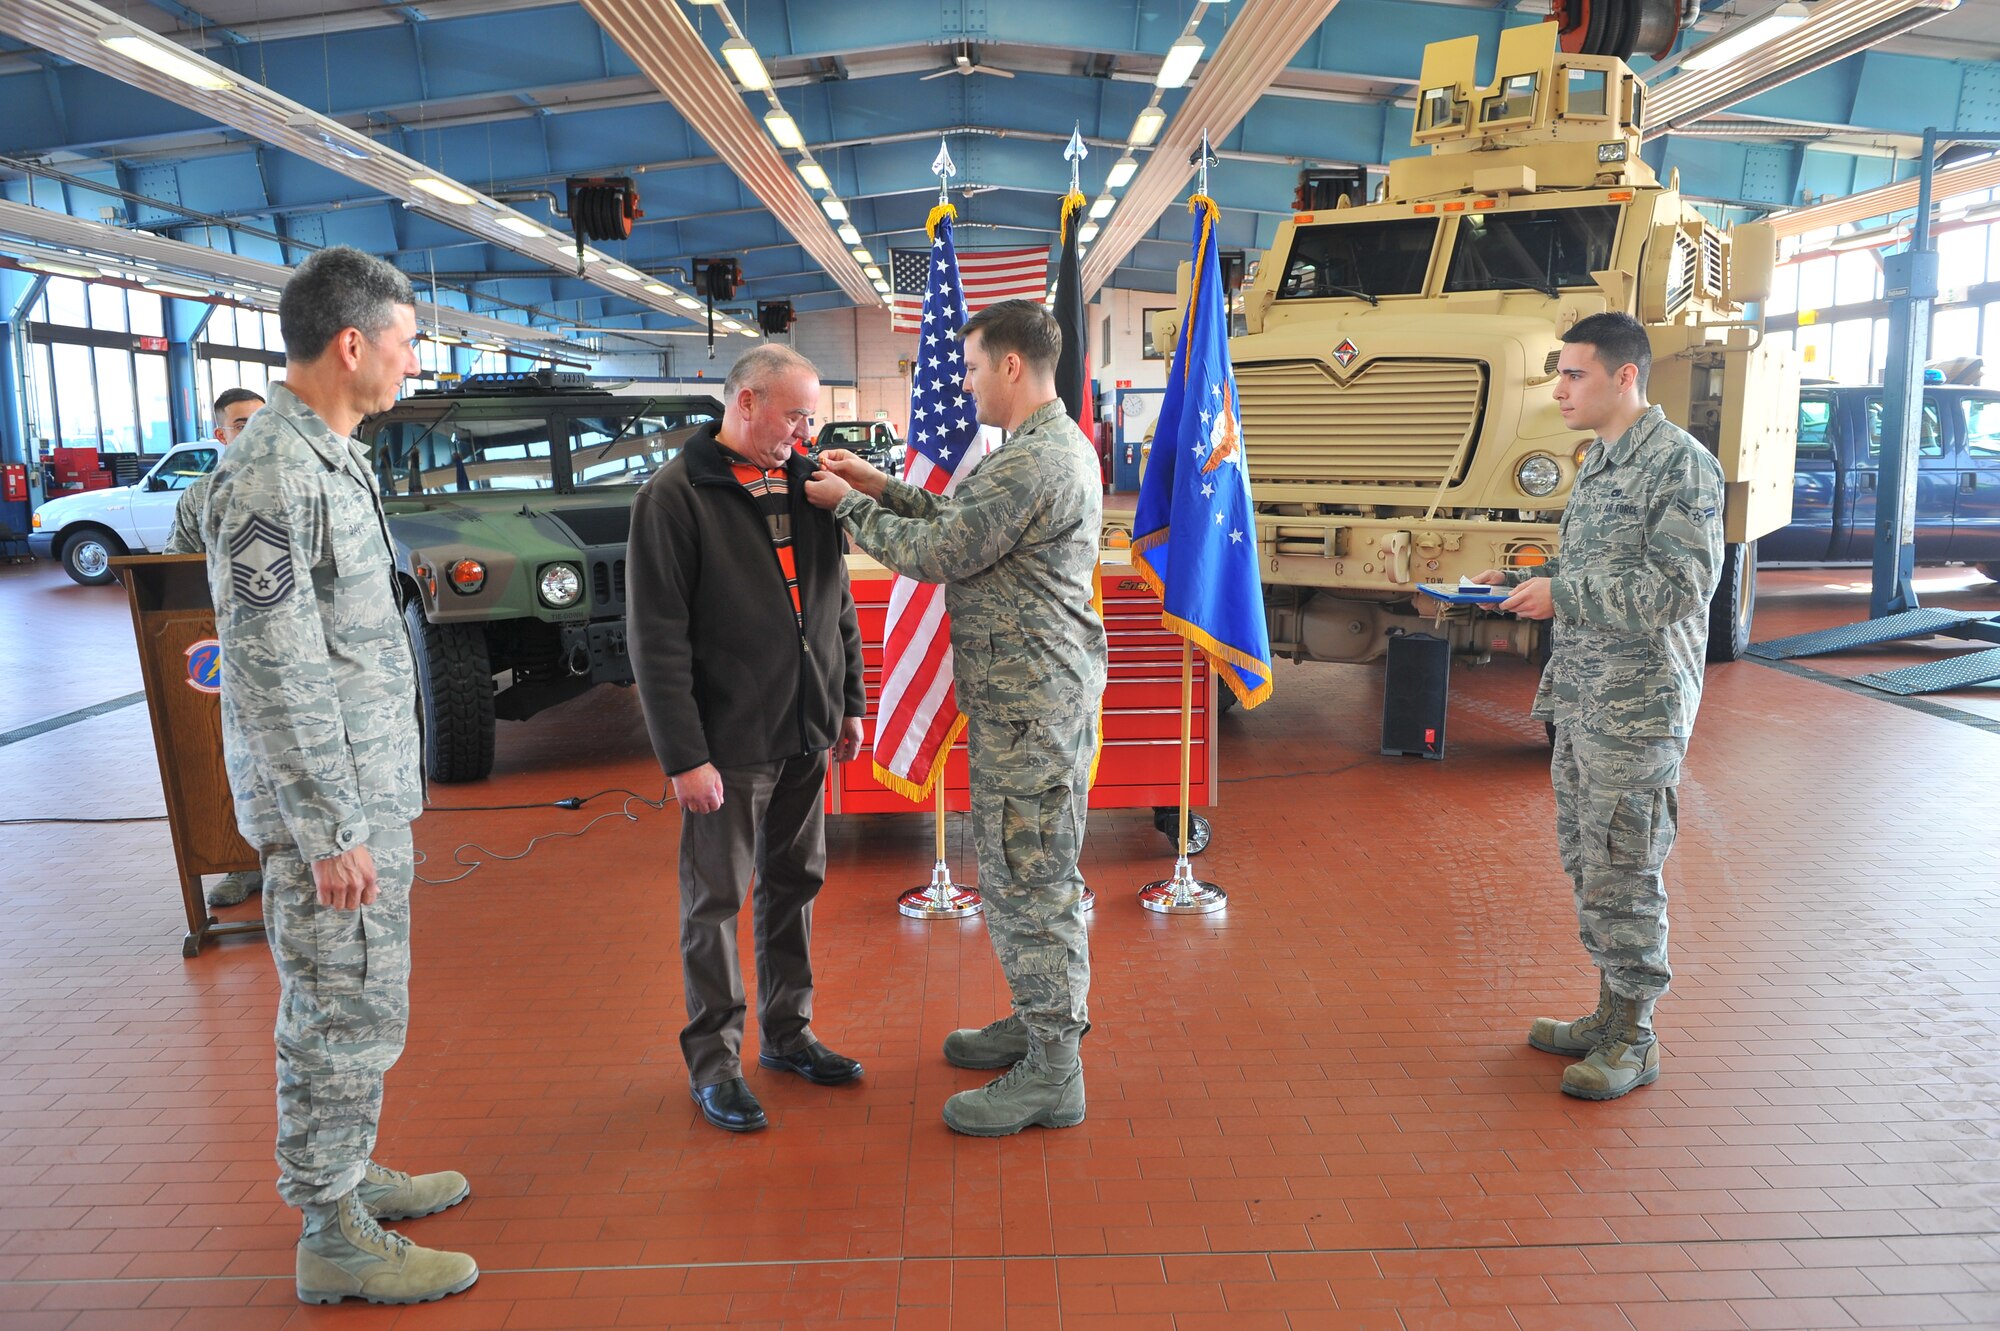 SPANGDAHLEM AIR BASE, Germany – Lt. Col. Jason Nulton, 52nd Logistics Readiness Squadron commander, places a civilian length of service pin on Mr. Hans Schinhofer, 52nd LRS lead vehicle operator, during a pinning ceremony inside Bldg. 110 here March 9. The ceremony honored Schinhofer for his 35 years of service to Spangdahlem AB. Distinguished visitor Chief Master Sgt. Billy Davis, vehicle operations career field manager, took time to participate in the ceremony, as well as to discuss upcoming changes in the career field and answer questions. (U.S. Air Force photo by Airman 1st Class Dillon Davis/Released)